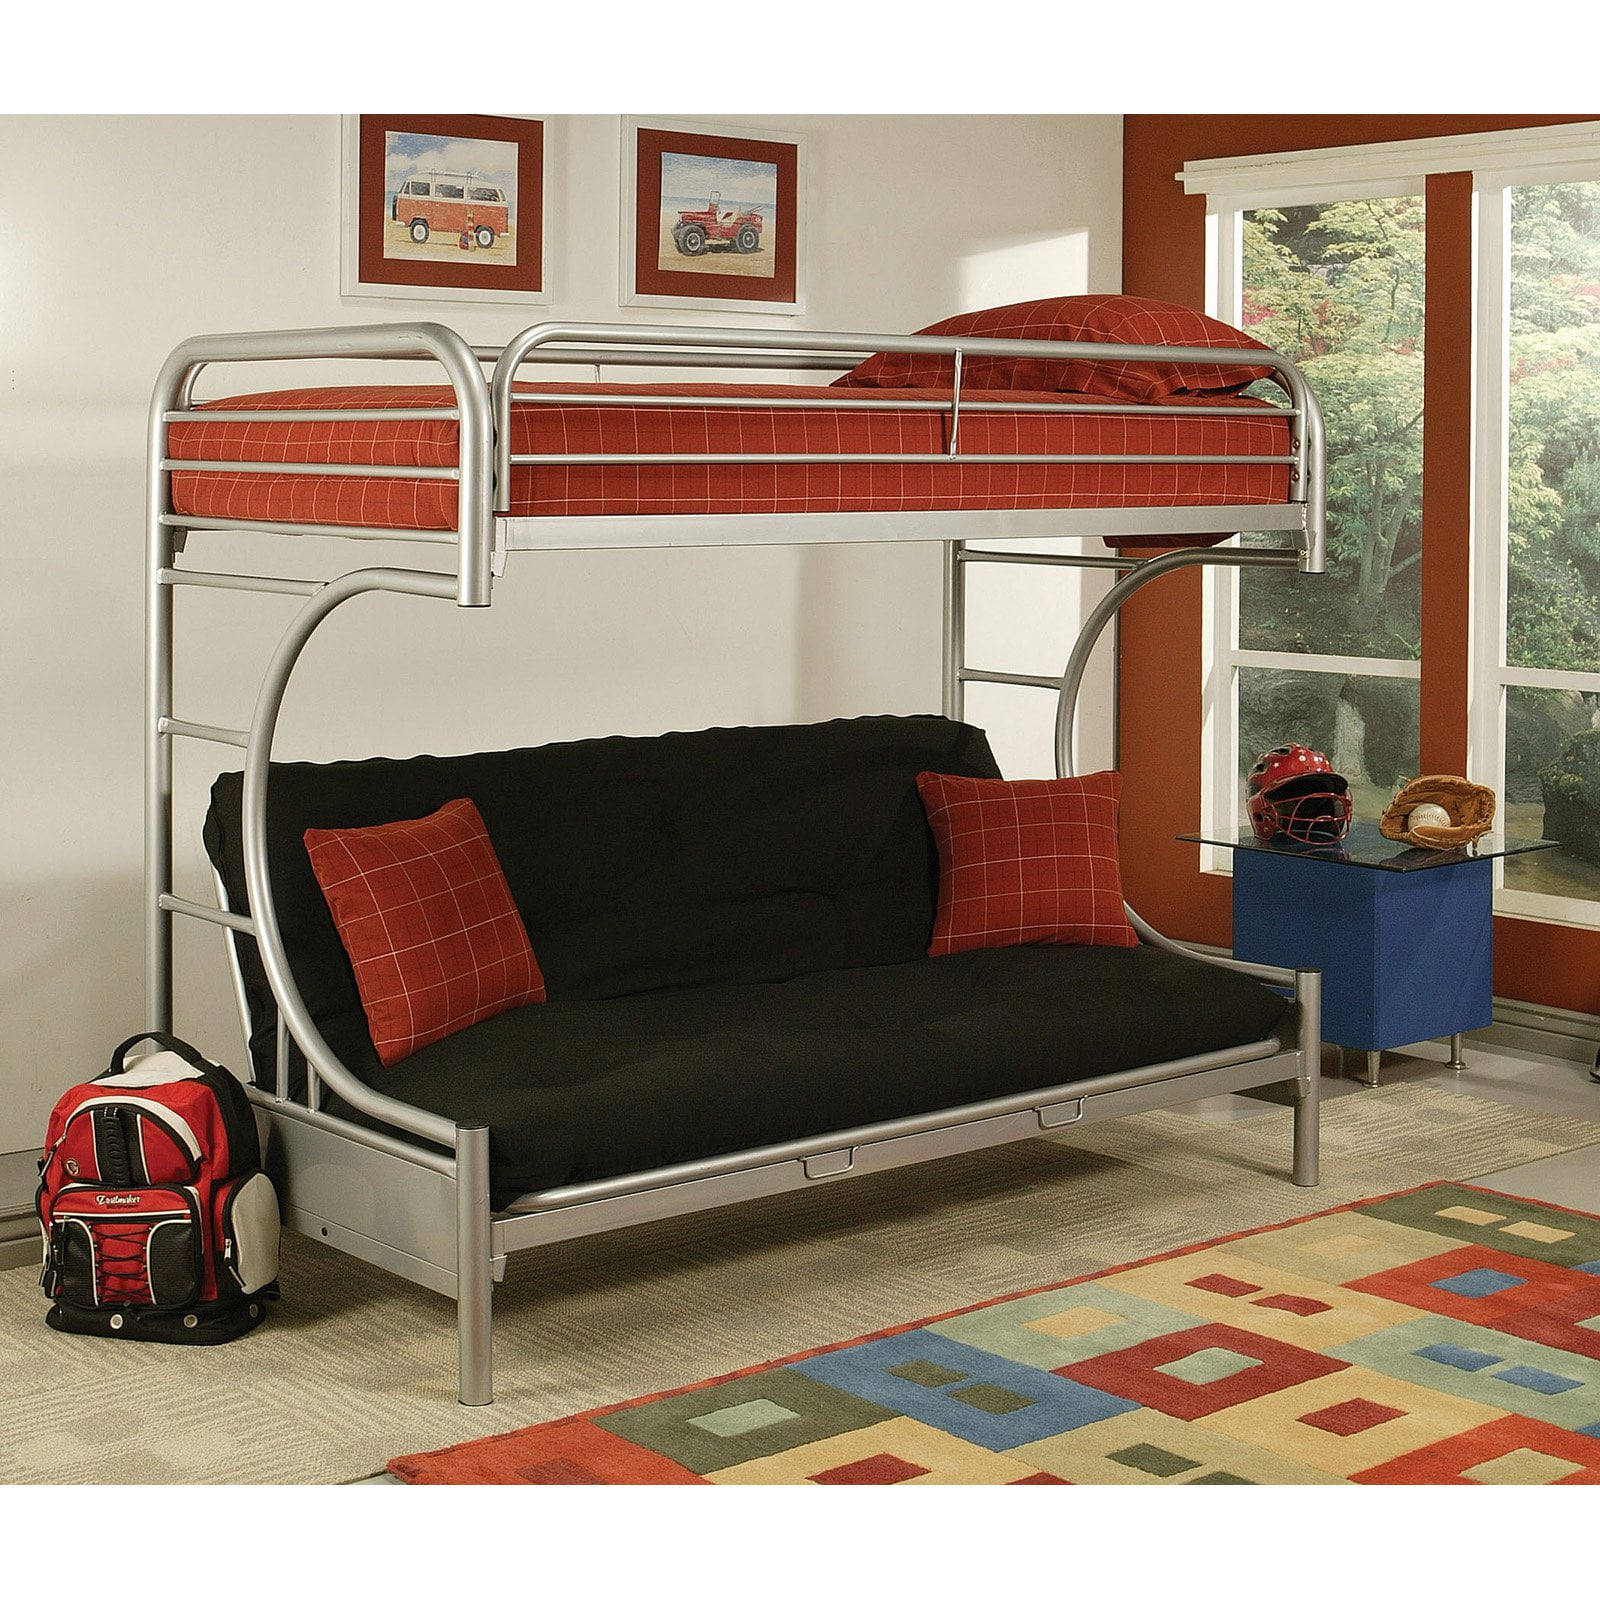 Acme Eclipse Twin Xl Queen Futon Bunk Bed Silver, Extra Long Twin Bunk Beds